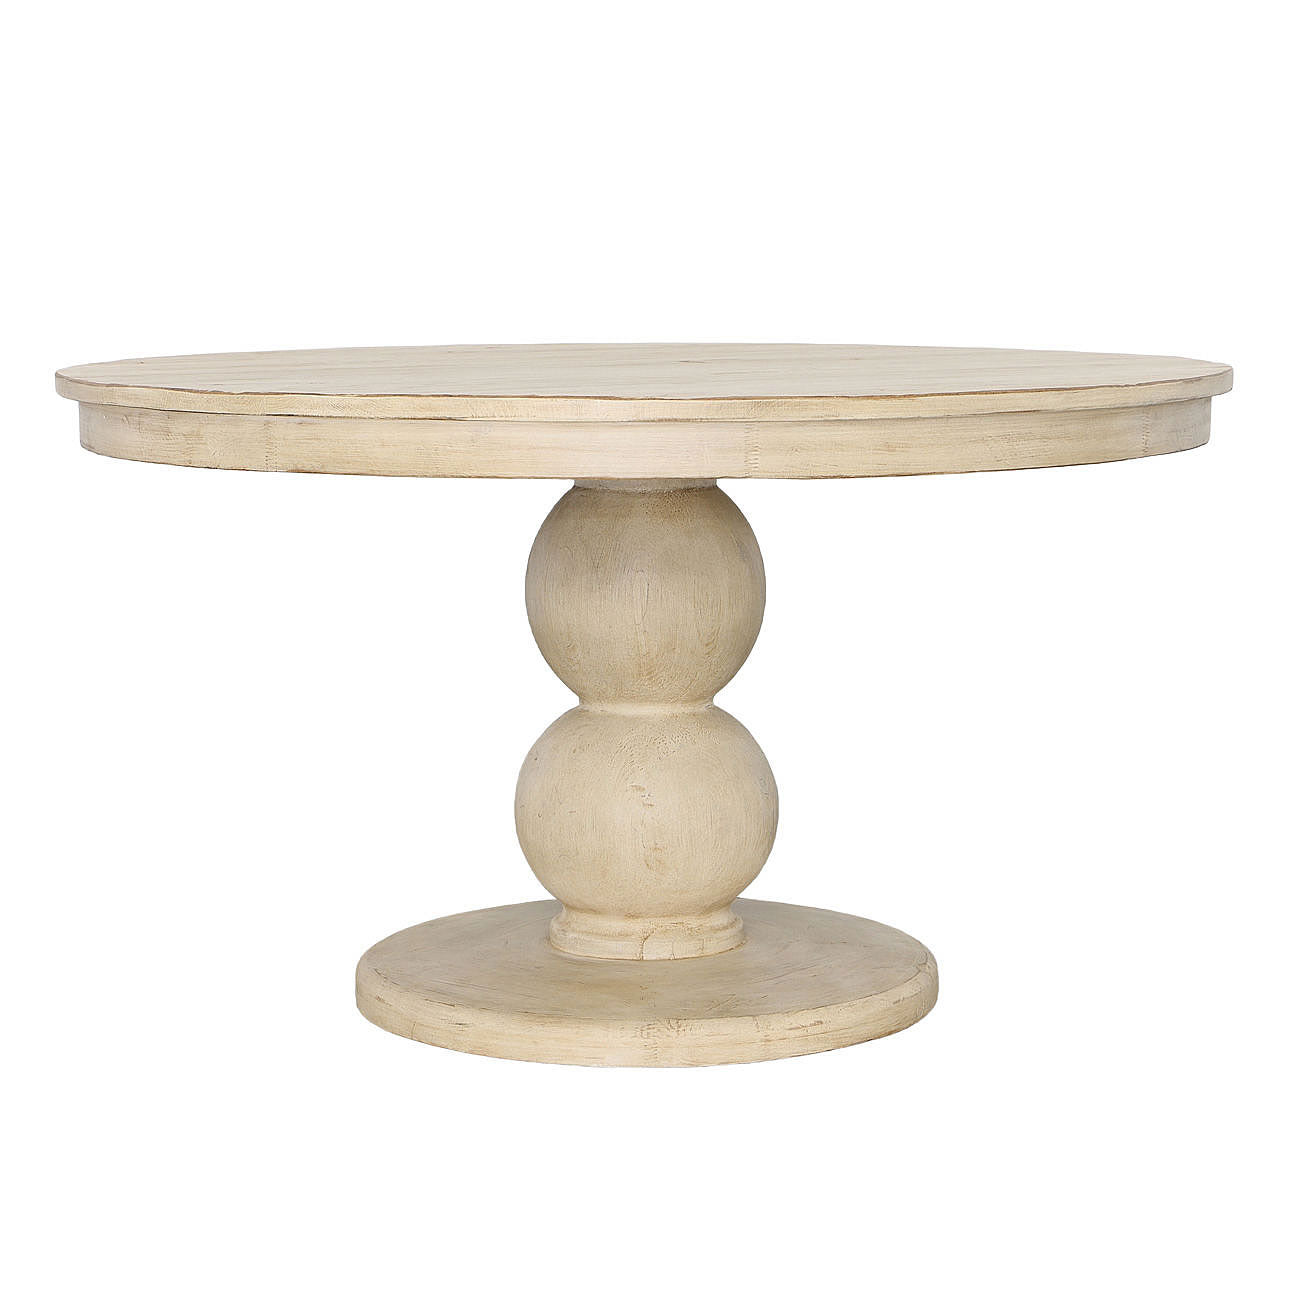 54-reclaimed-pine-wood-round-pedestal-dining-table